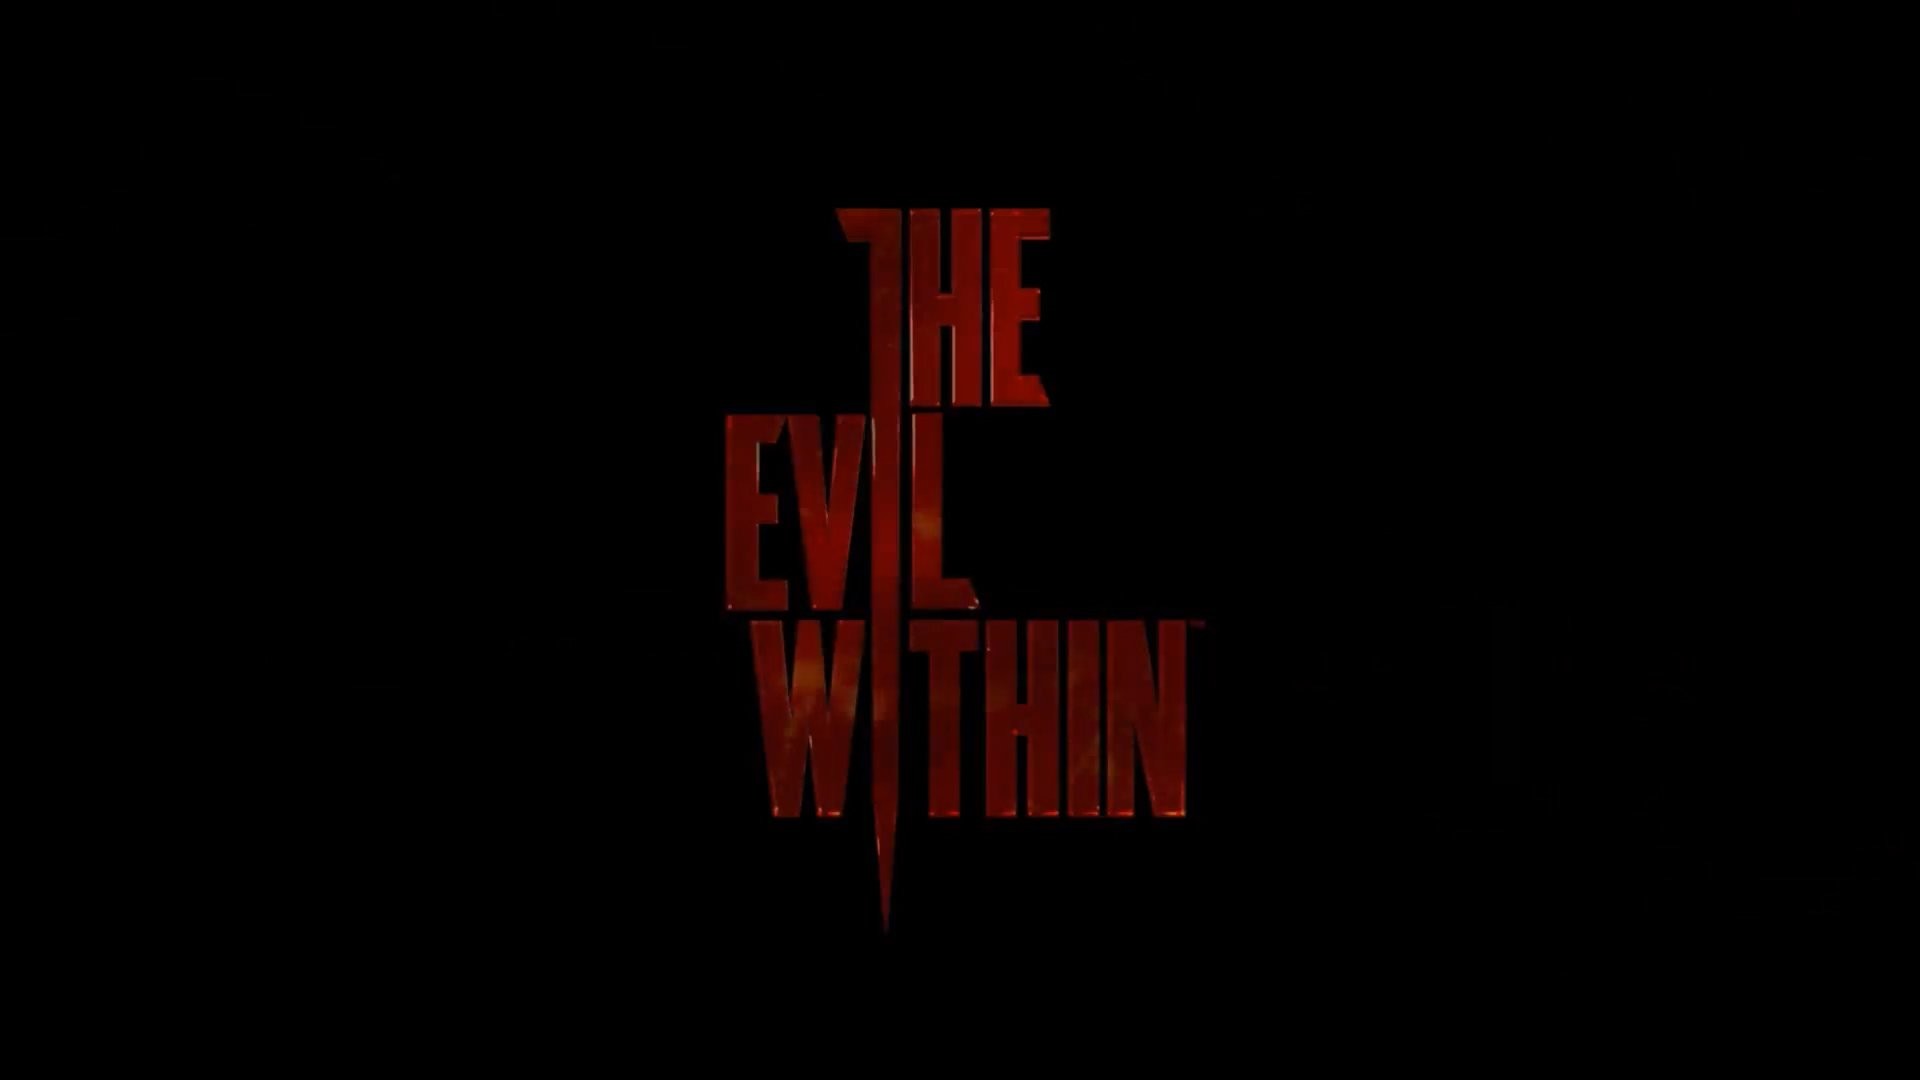 1920x1080 IPhone S The evil within Wallpapers HD Desktop Backgrounds